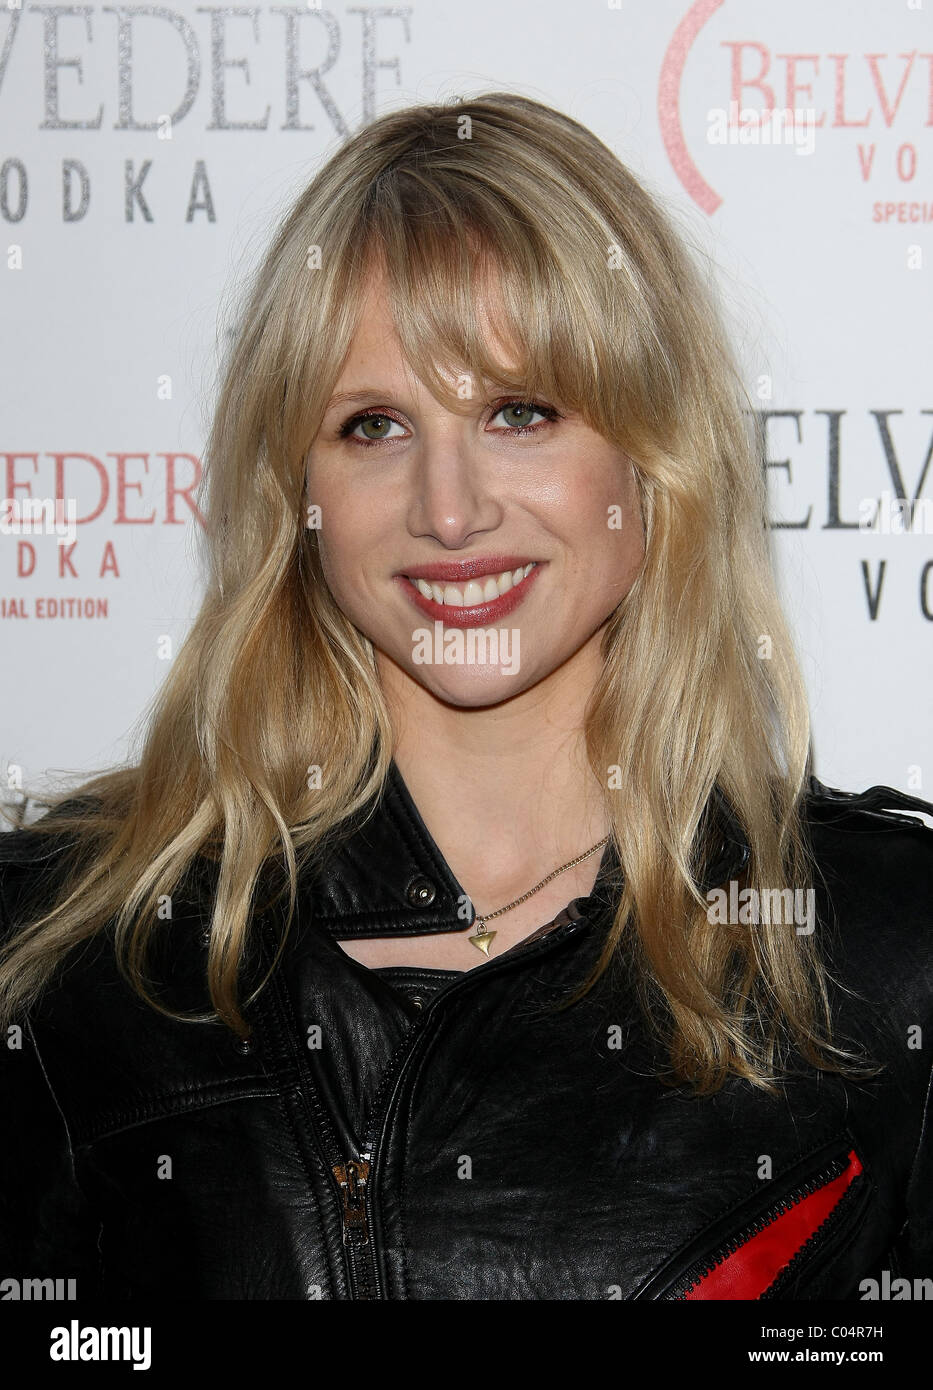 LUCY PUNCH BELVEDERE RED LAUNCHES WITH USHER HOLLYWOOD LOS ANGELES CALIFORNIA USA 10 February 2011 Stock Photo